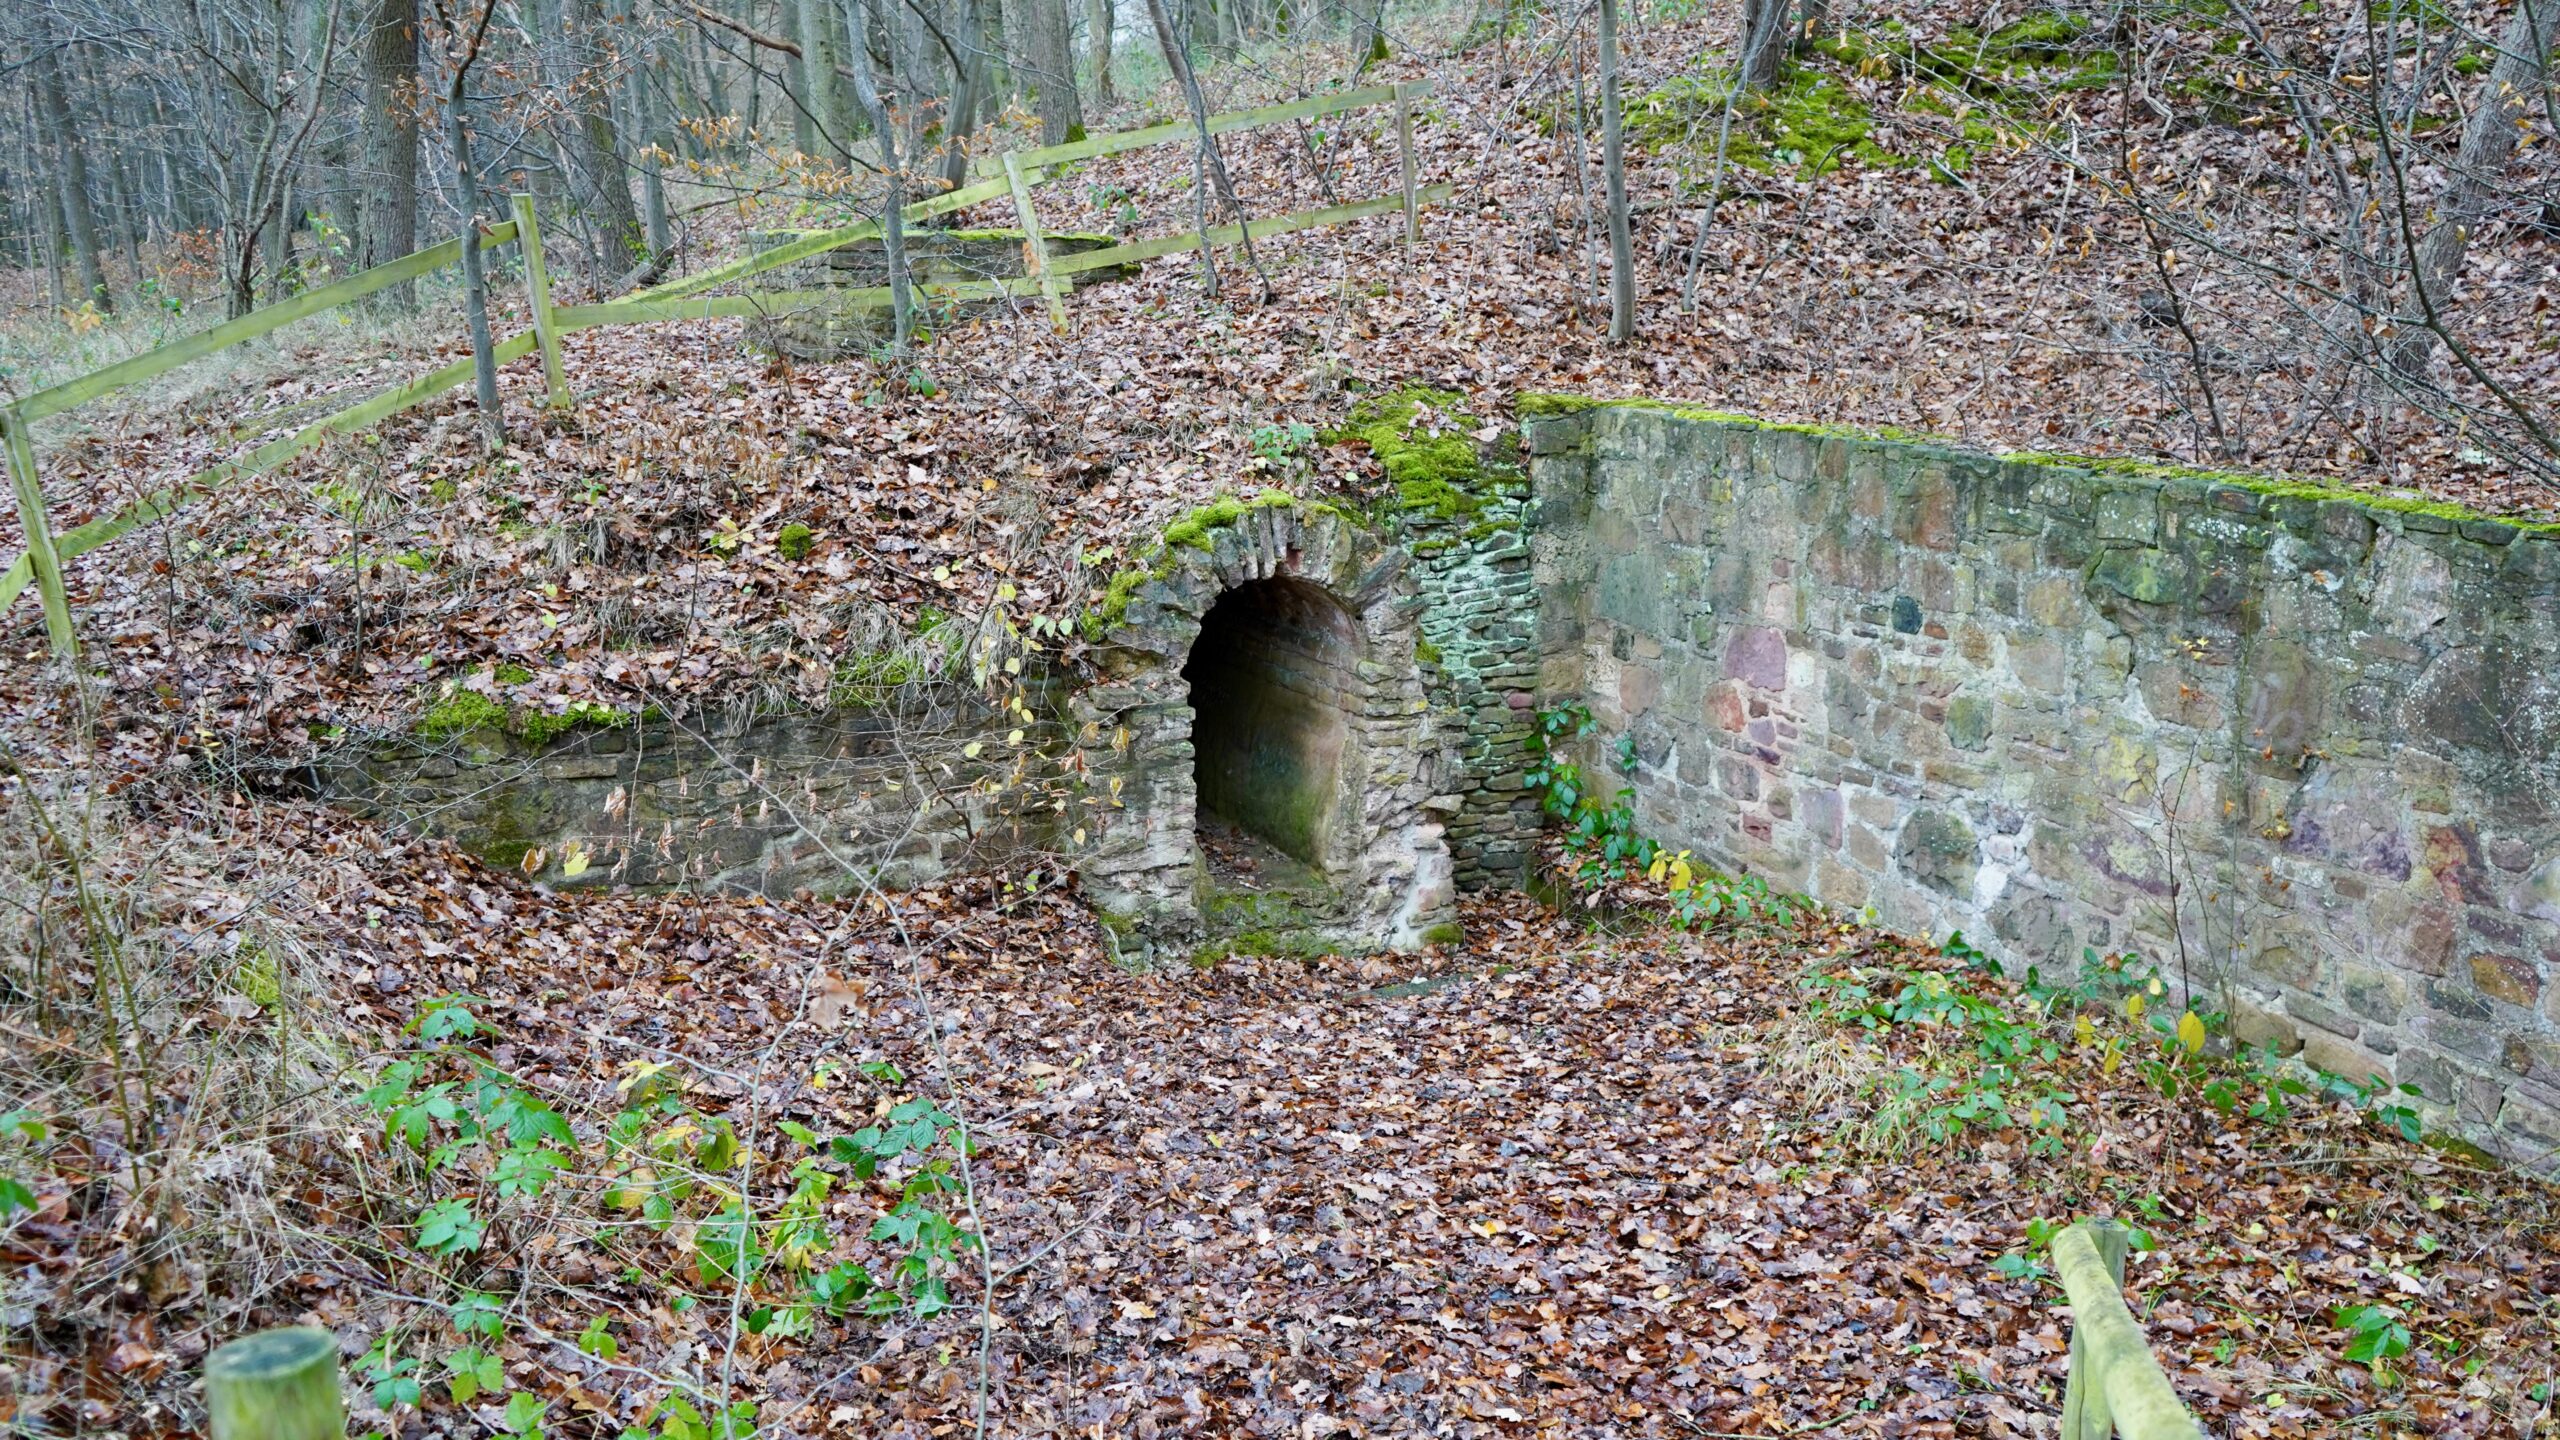 an excavated and exposed roman aqueduct with a stone wall and cross section of stone with a flat bottom, vertical sides, and an arched top about 3 feet tall and 2 feet wide in the eifel region germany